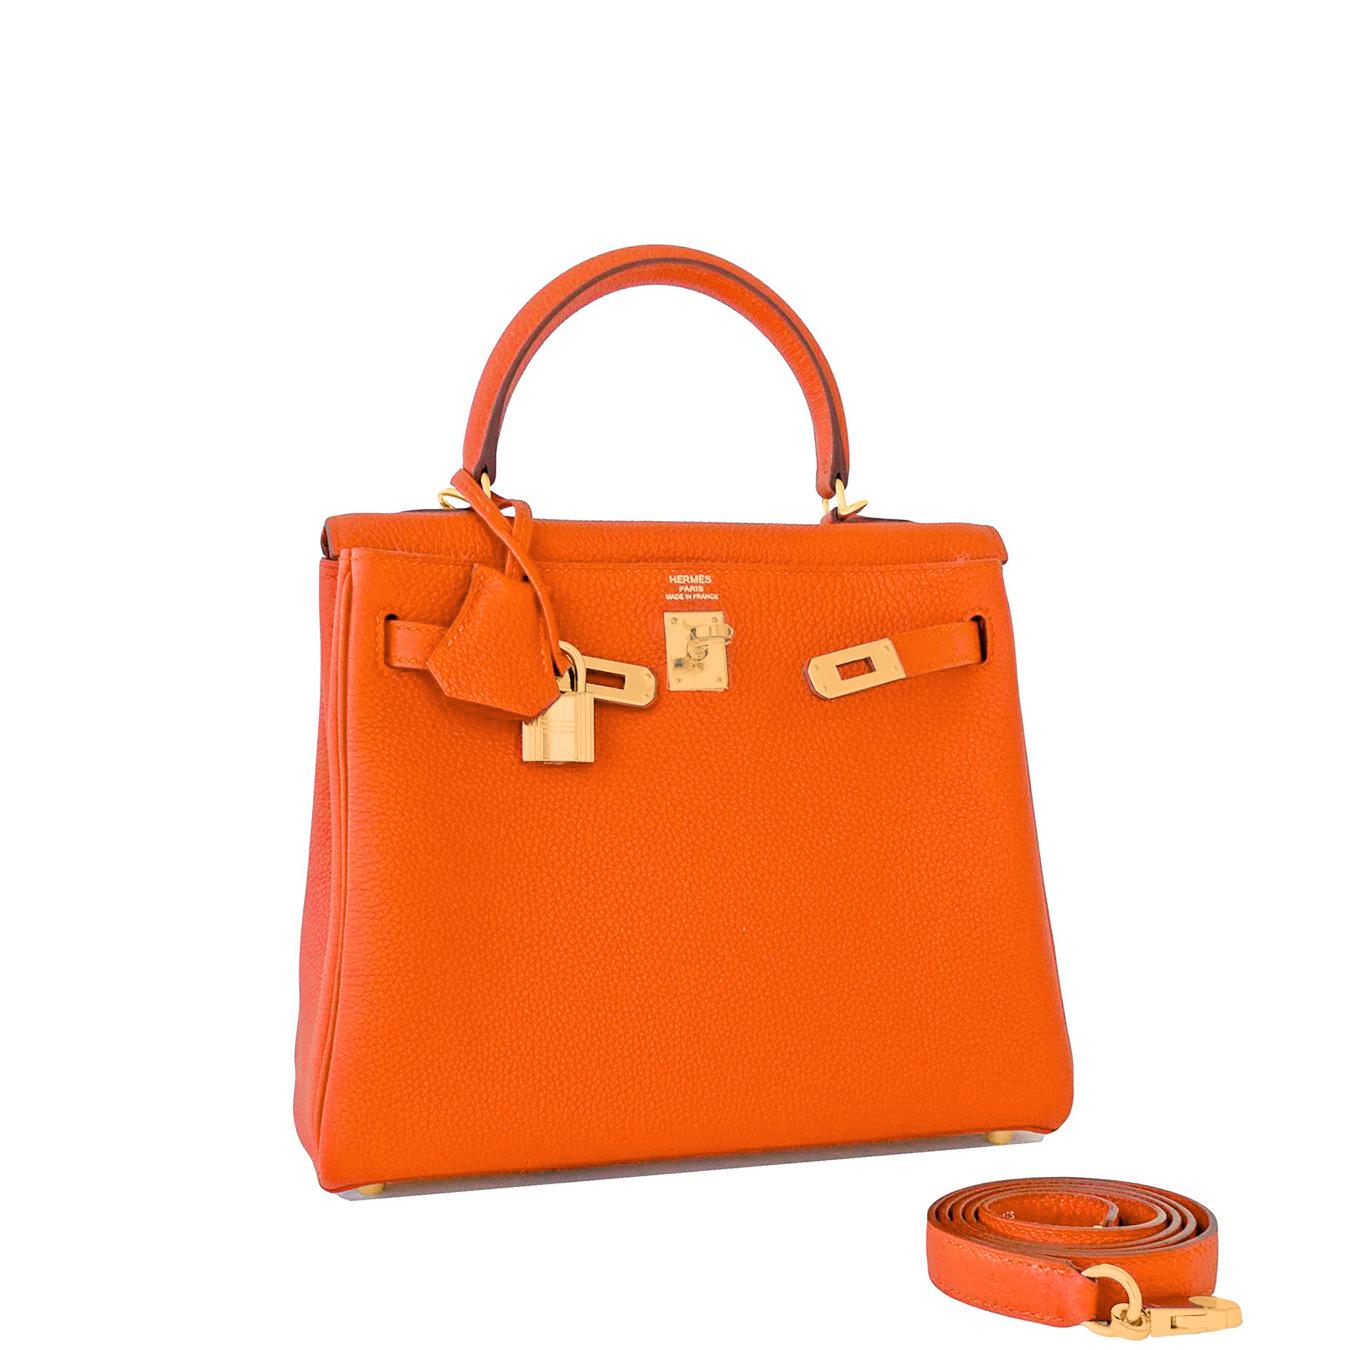 Hermes Feu Orange 25cm Togo Mini Kelly Bag Gold Y Stamp
Brand New in Box. Store Fresh. Pristine Condition (with plastic on hardware)
Just purchased from Hermes store; bag bears new 2020 interior Y Stamp.
Comes full set with keys, lock, clochette,